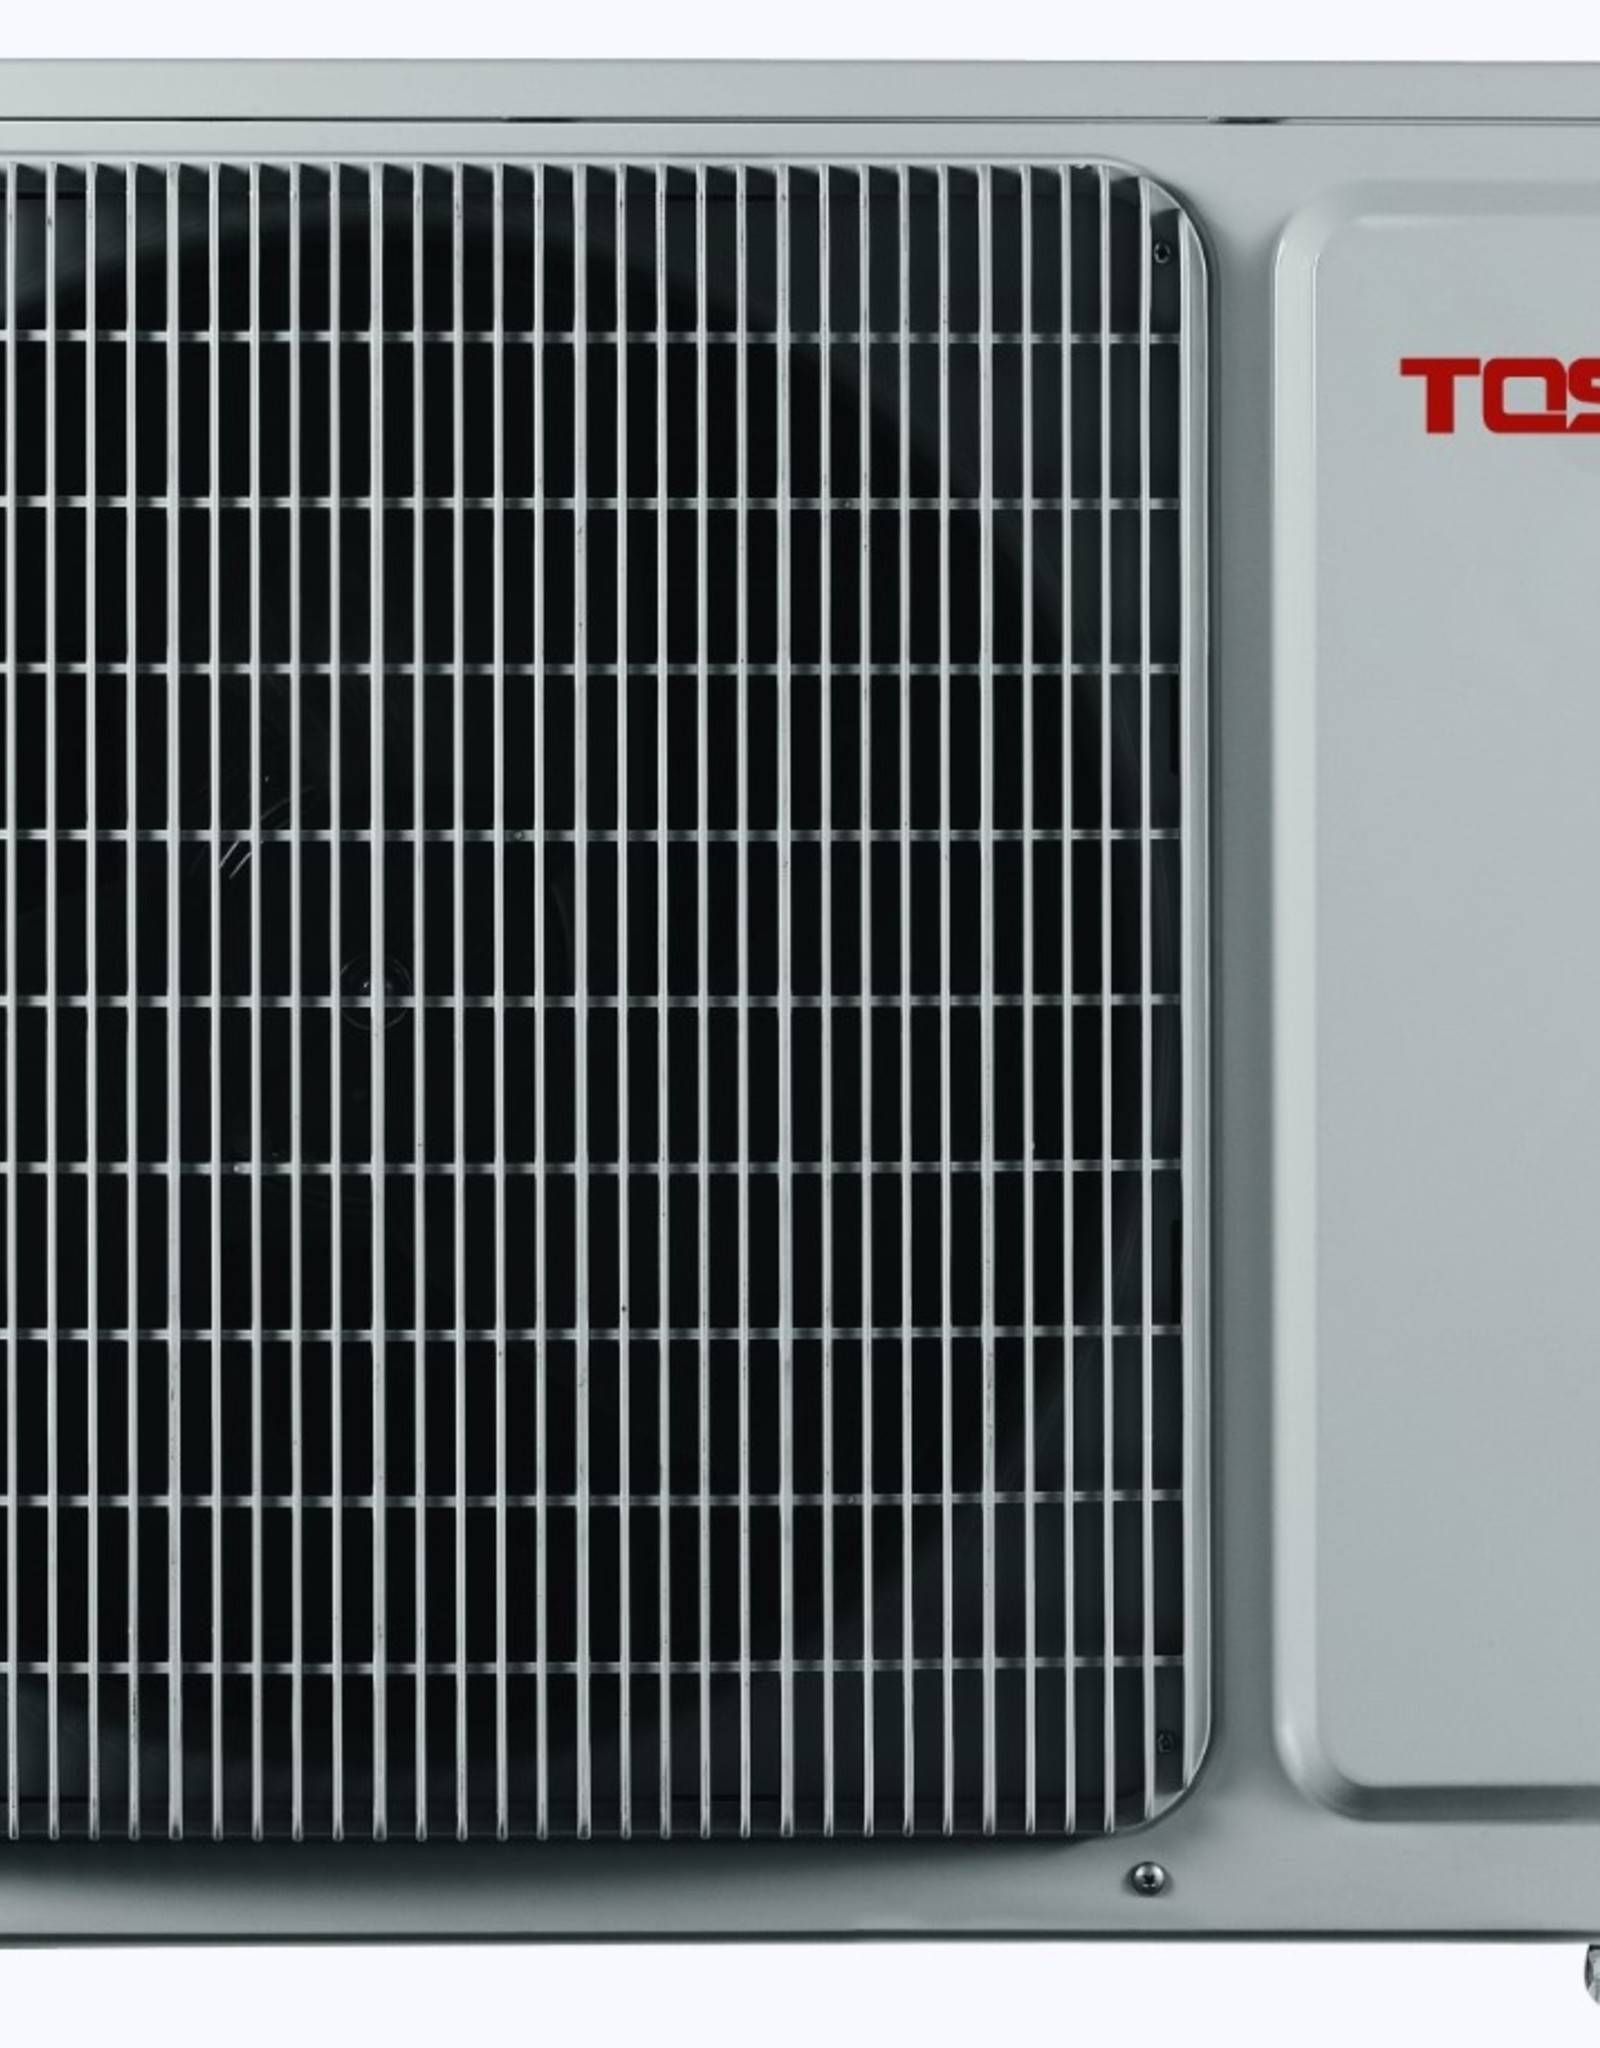 Tosot TOSOT BORA 4,6 kW R32 inverter set by GREE